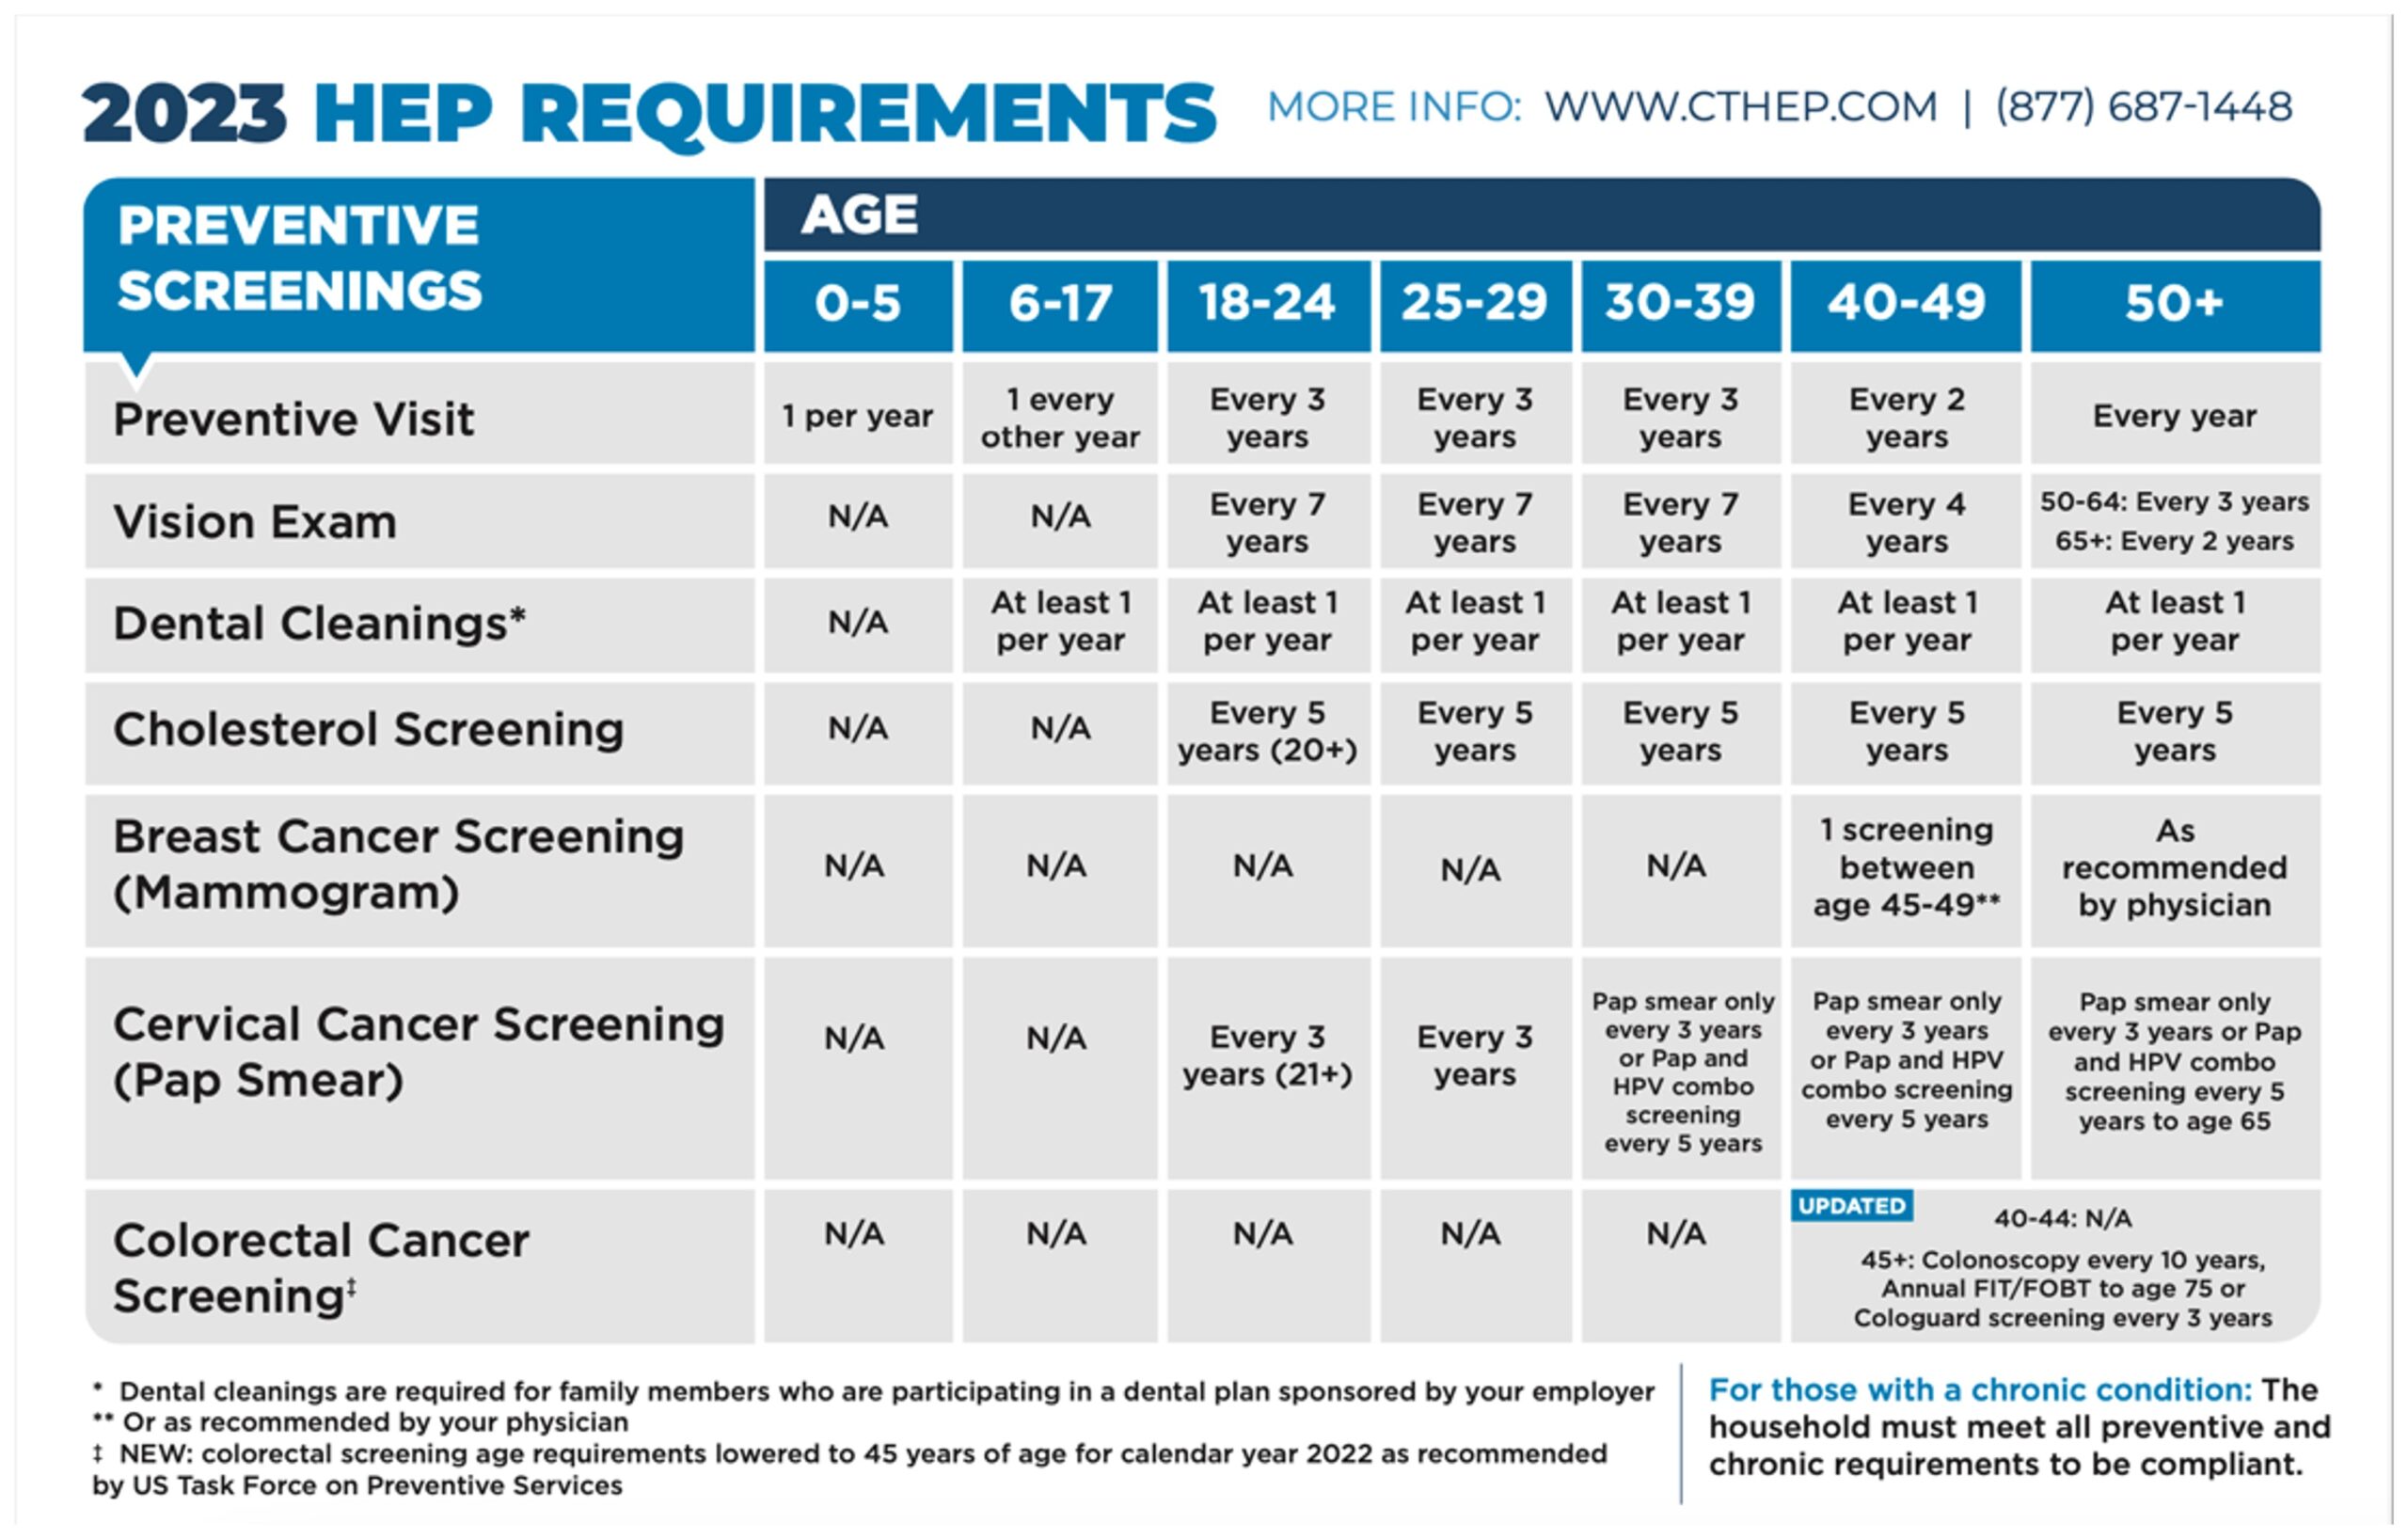 This chart describes the frequency of required screenings by various age ranges for the Connecticut Health Enhancement Program. The screenings include preventive visits, vision exams, dental cleanings, cholesterol screenings, breast cancer screenings, cervical cancer screenings, and colorectal screenings.